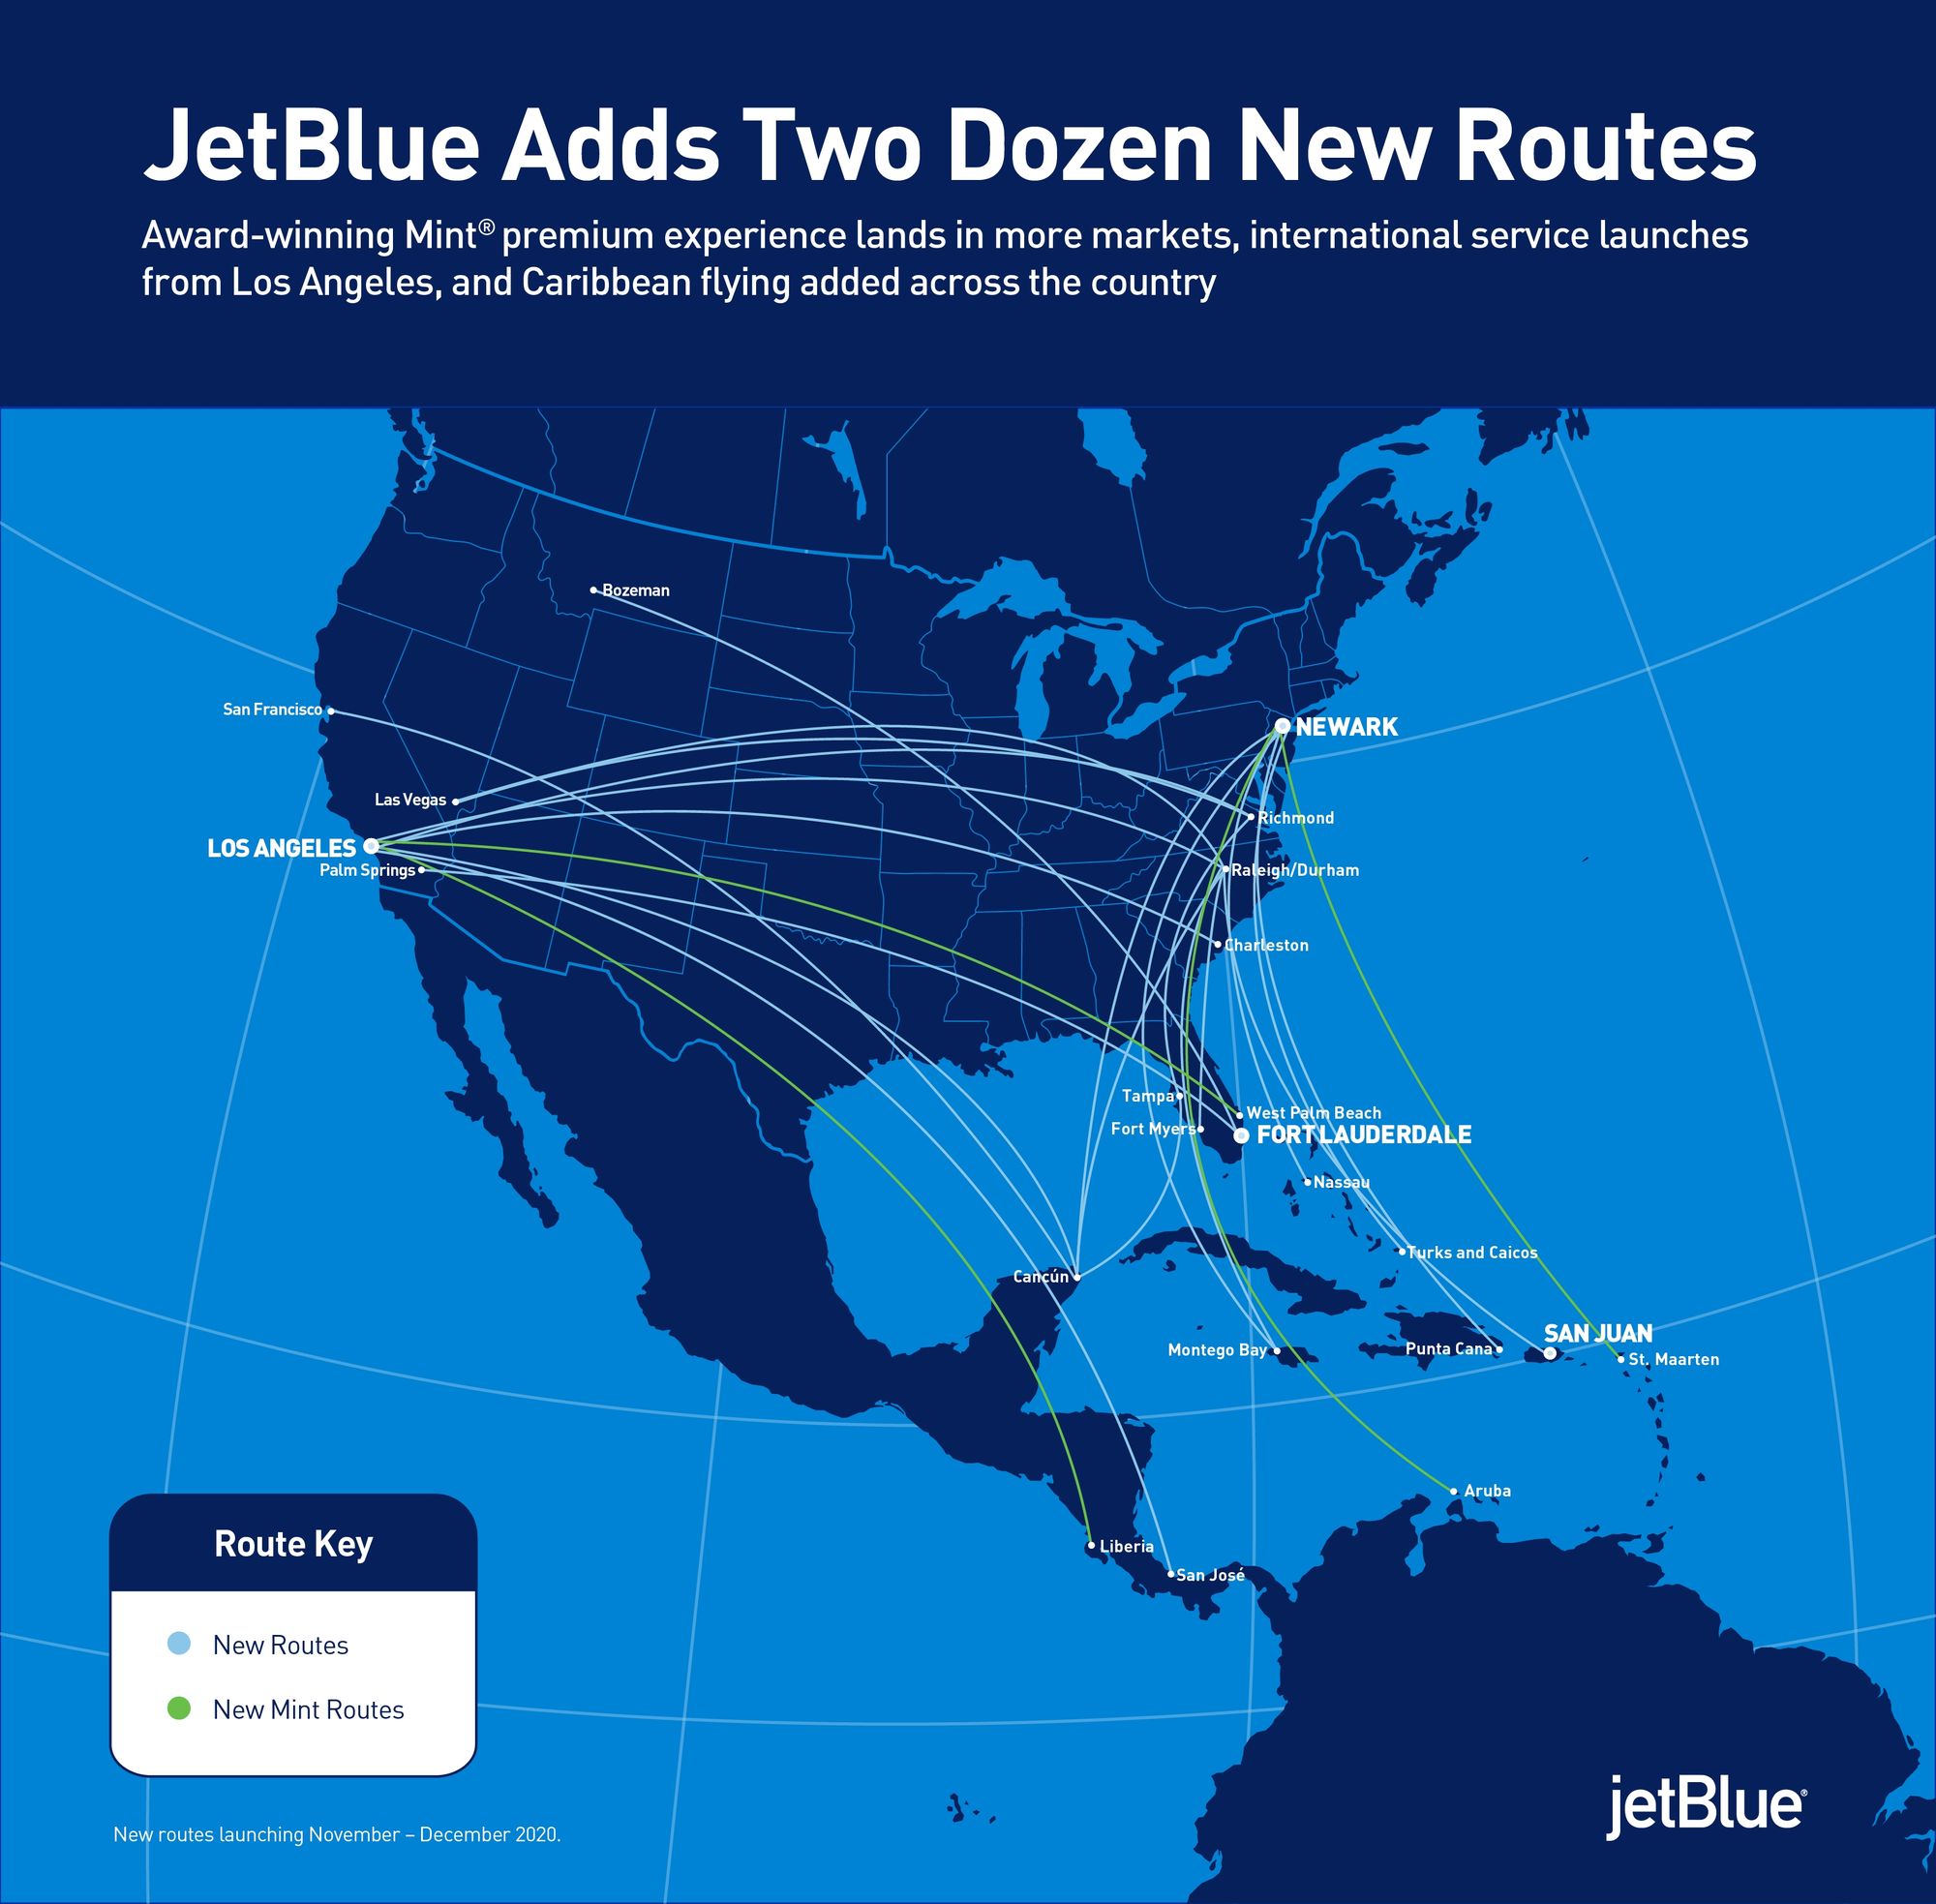 JetBlue Adds Two Dozen New Routes in Markets with Strengthened Demand